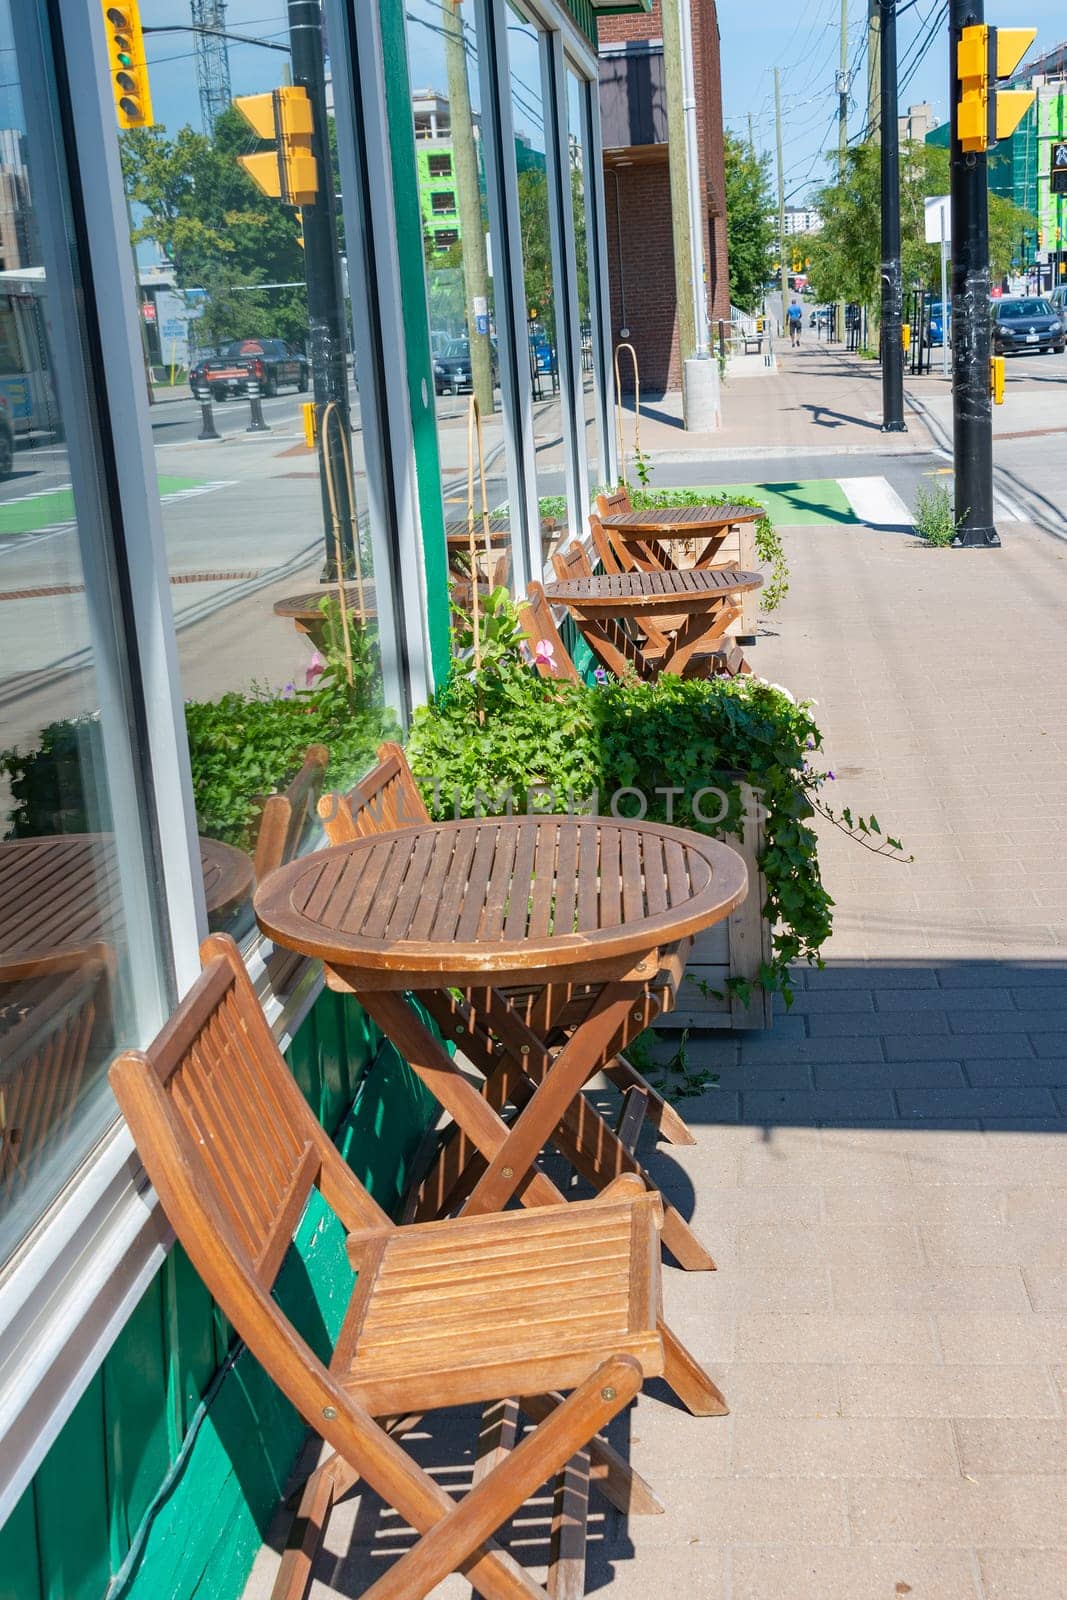 On a sunny summer day, the hosts put tables on the sidewalk near the cafe